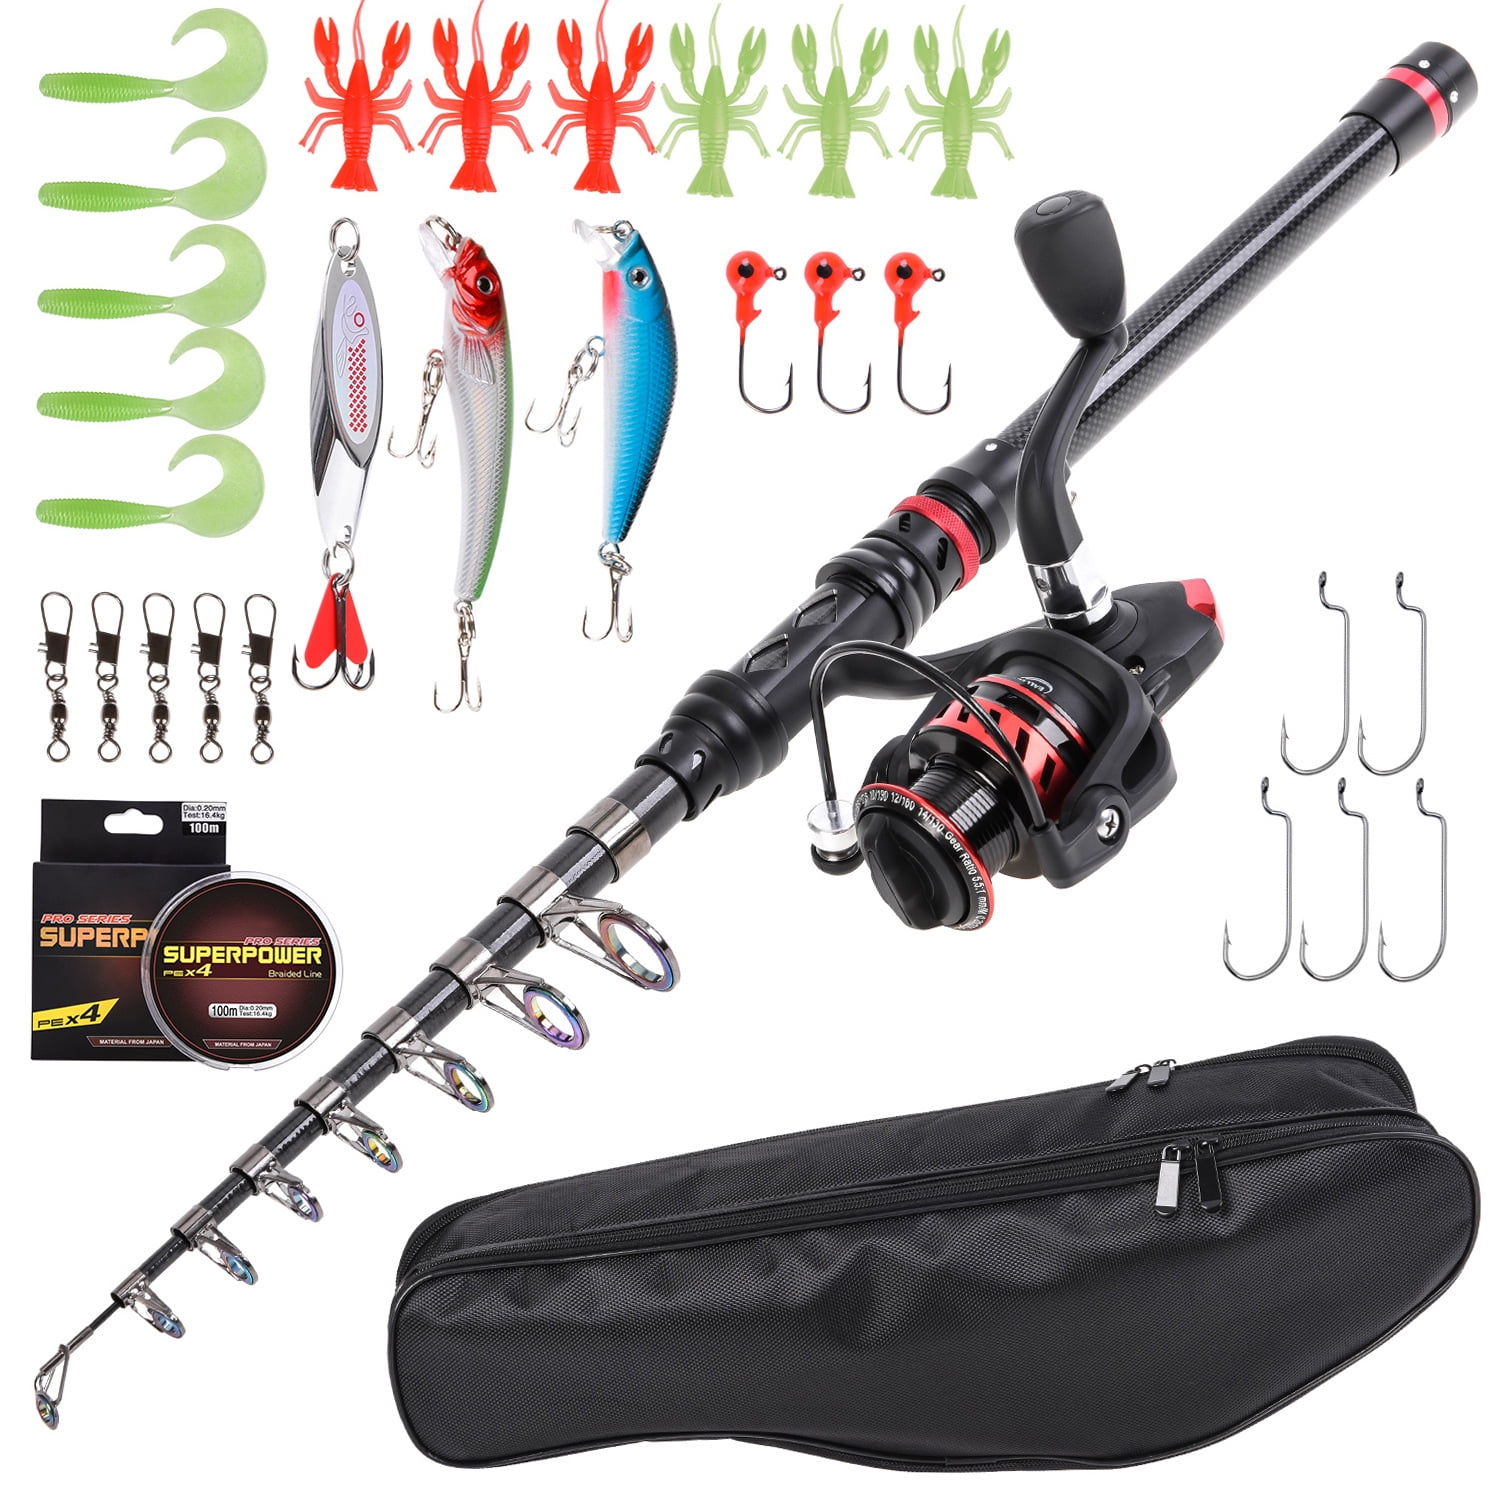 Best Walmart Fishing Gear for Beginners - Rods, Reels, Lures, Tackle 